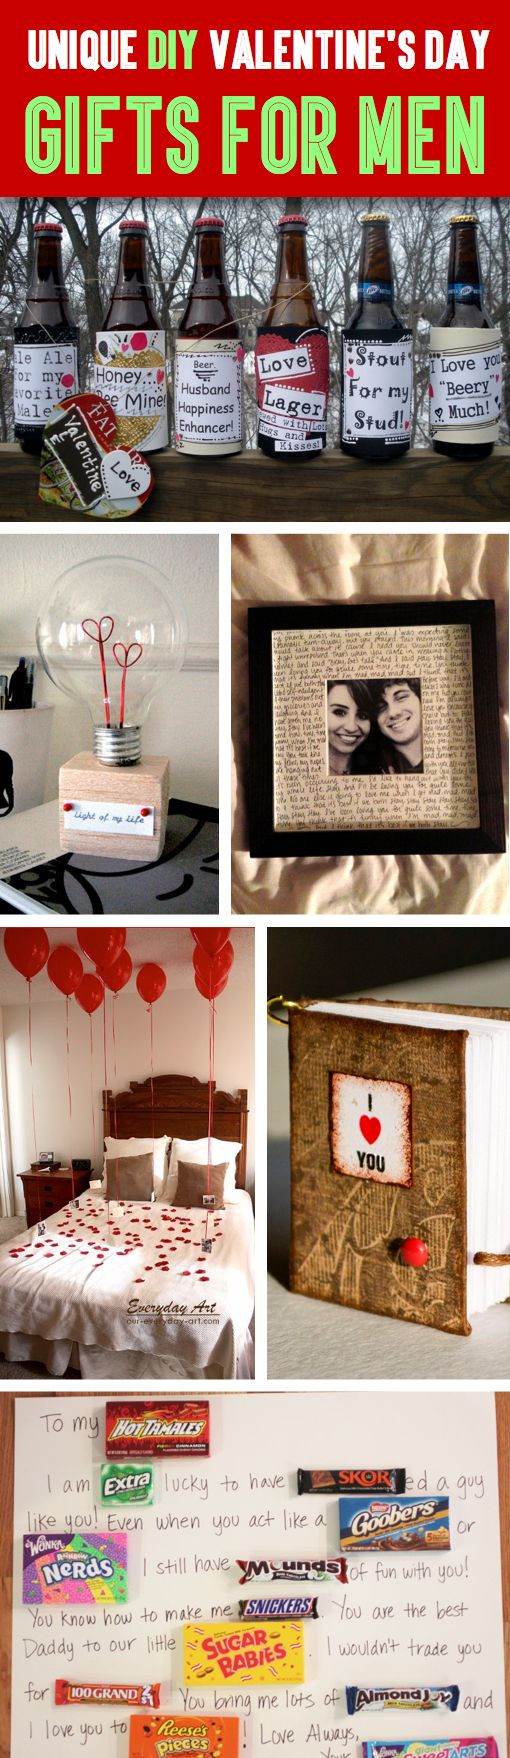 Cheap Valentine Gift Ideas For Men
 35 Unique DIY Valentine’s Day Gifts For Men